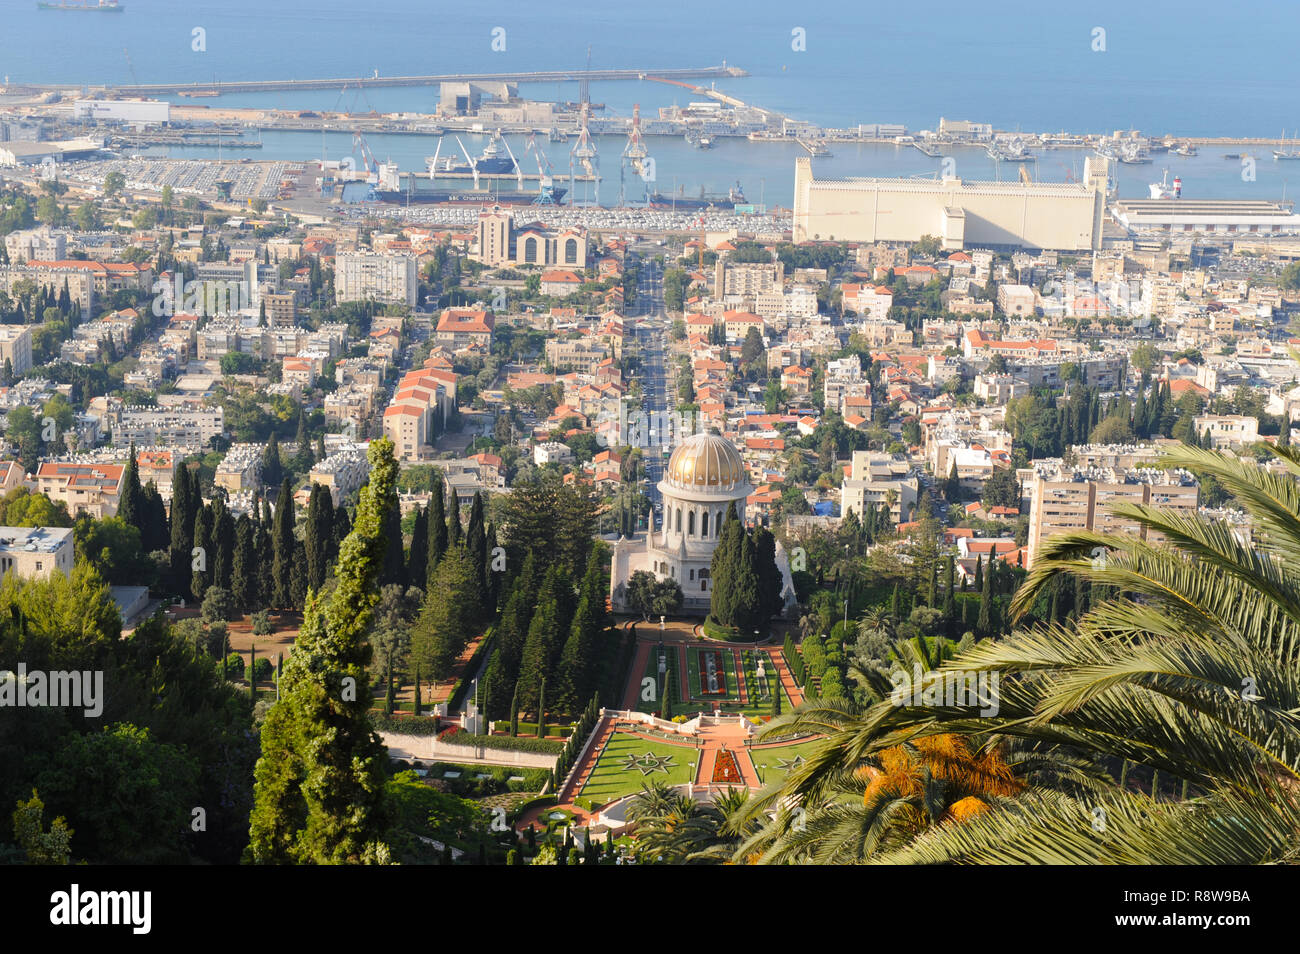 Gorgeous landscape of ancient historical Haifa port city in northern Israel on slopes of Carmel Mountain and Mediterranean Sea. Stock Photo